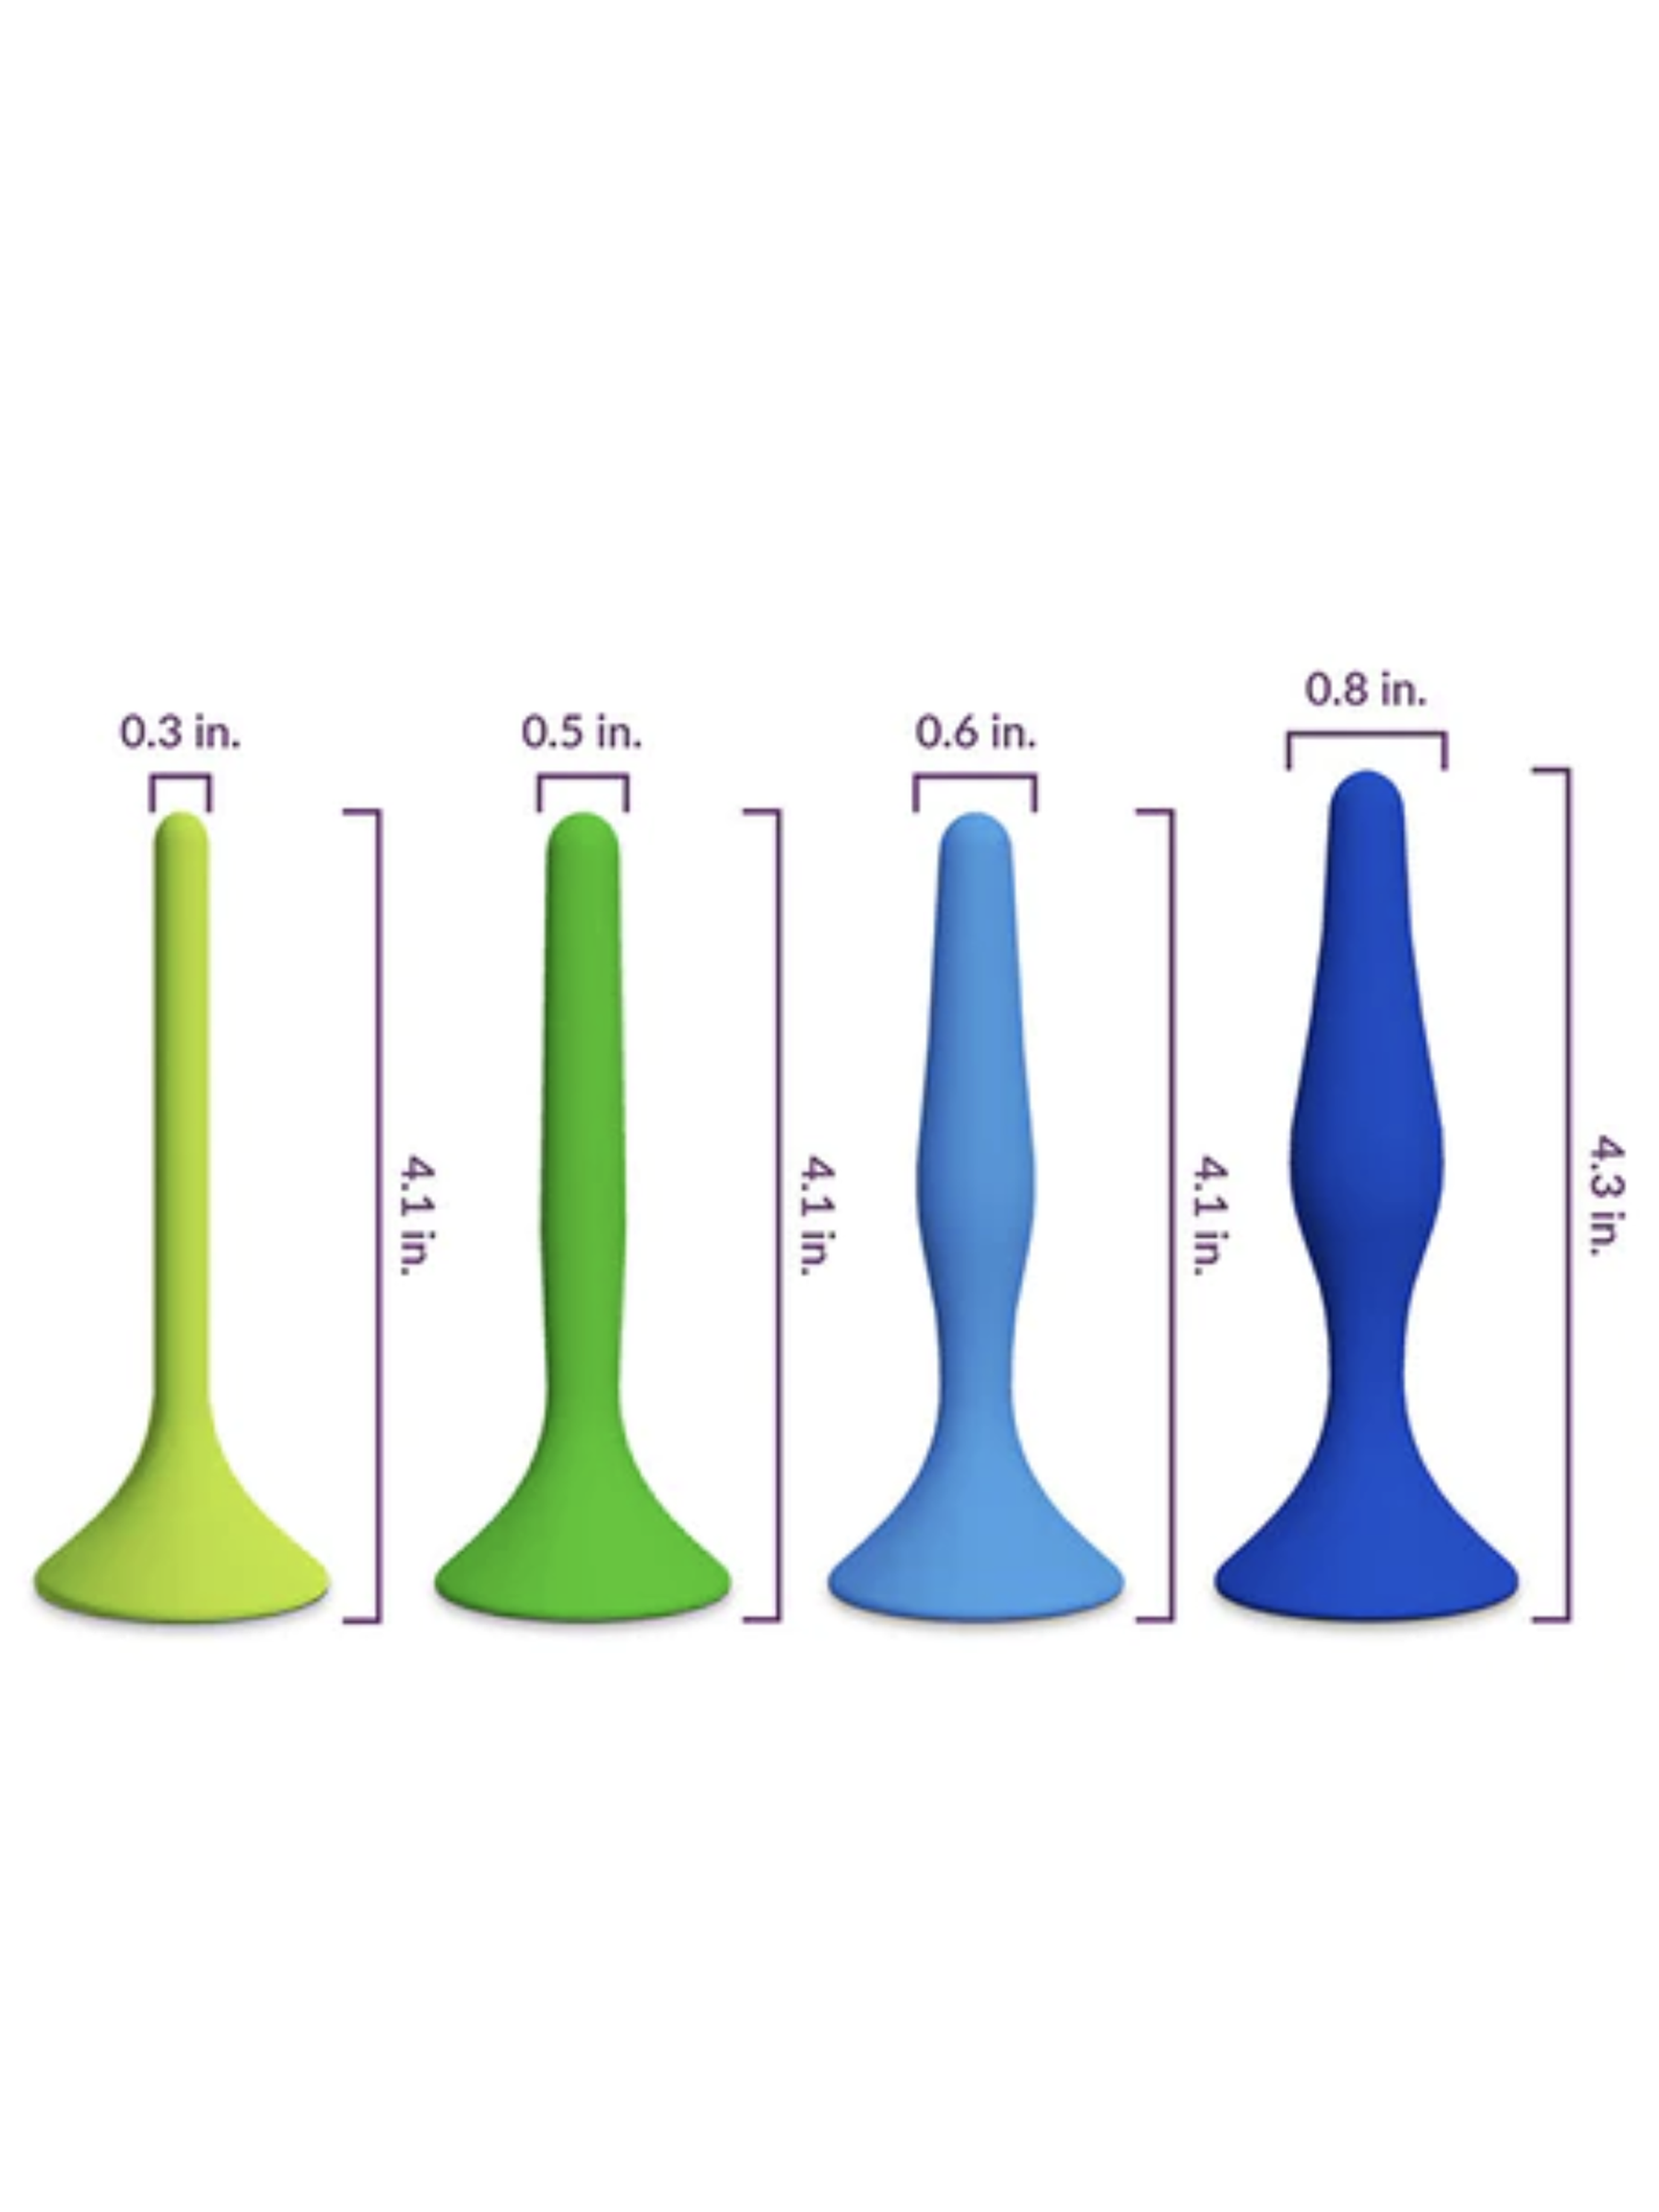 IntimateRose Rectal Dilators Small with Dimensions